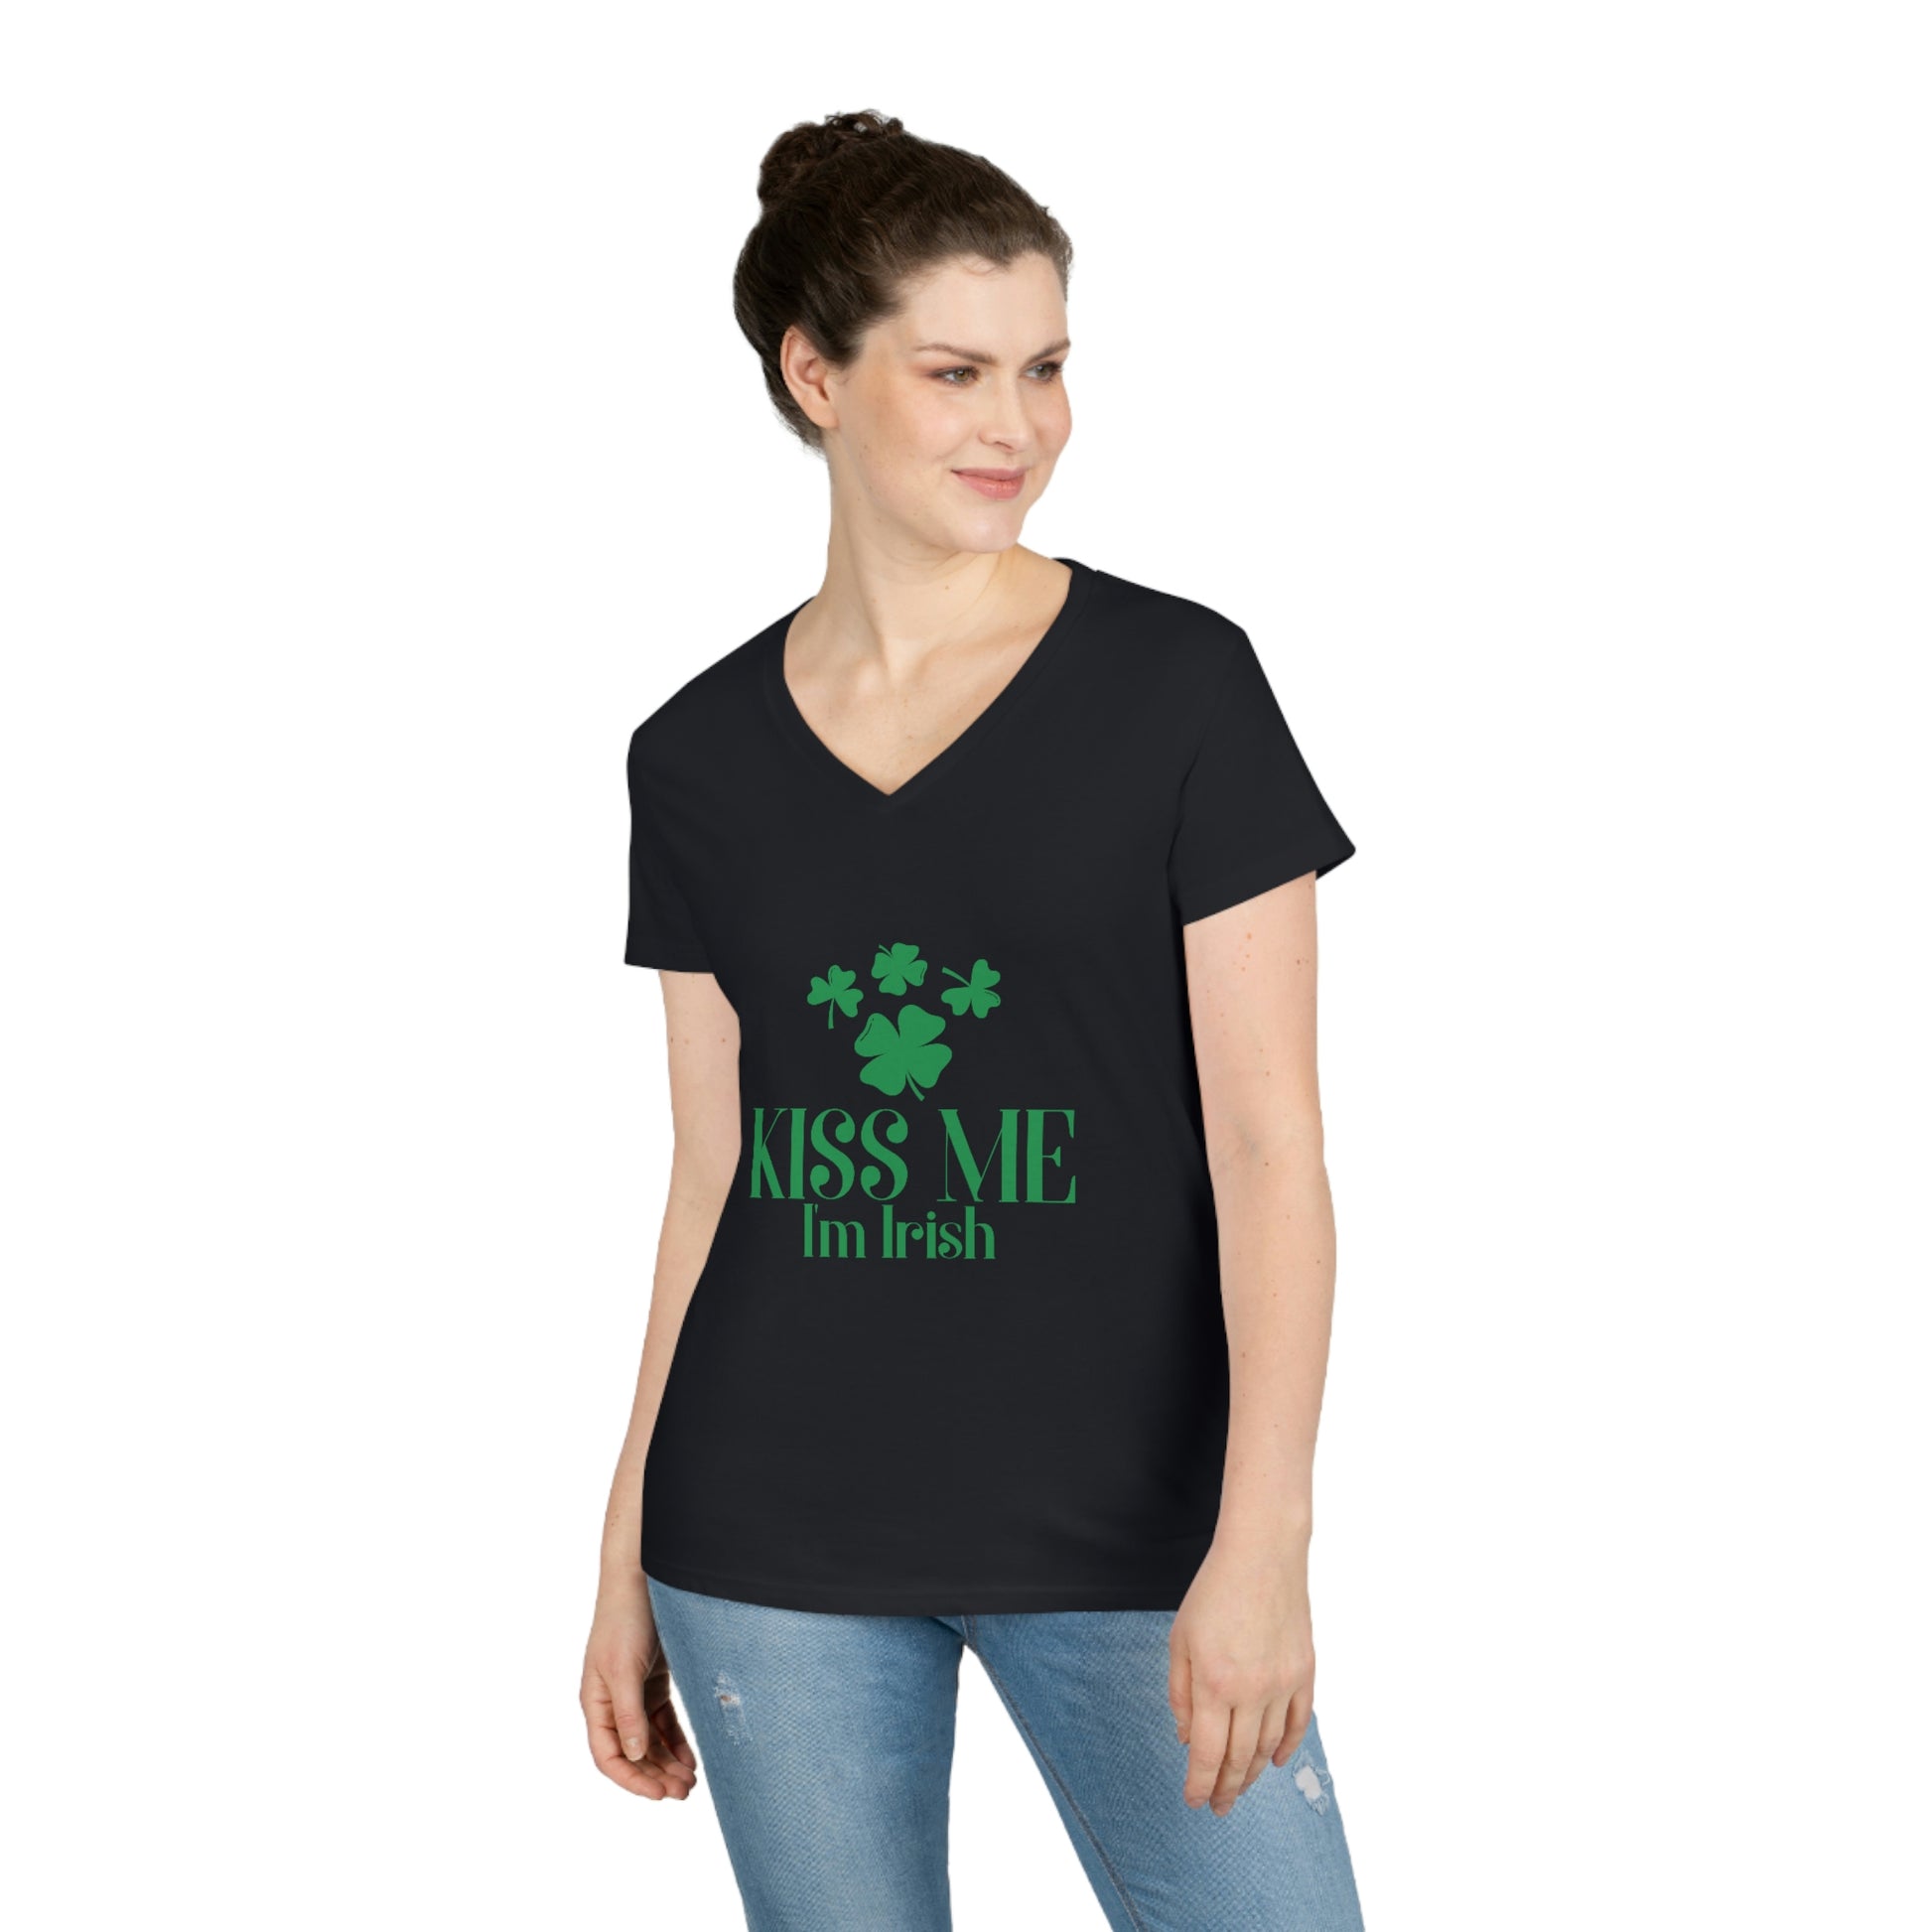 Mock up of woman wearing the black t-shirt